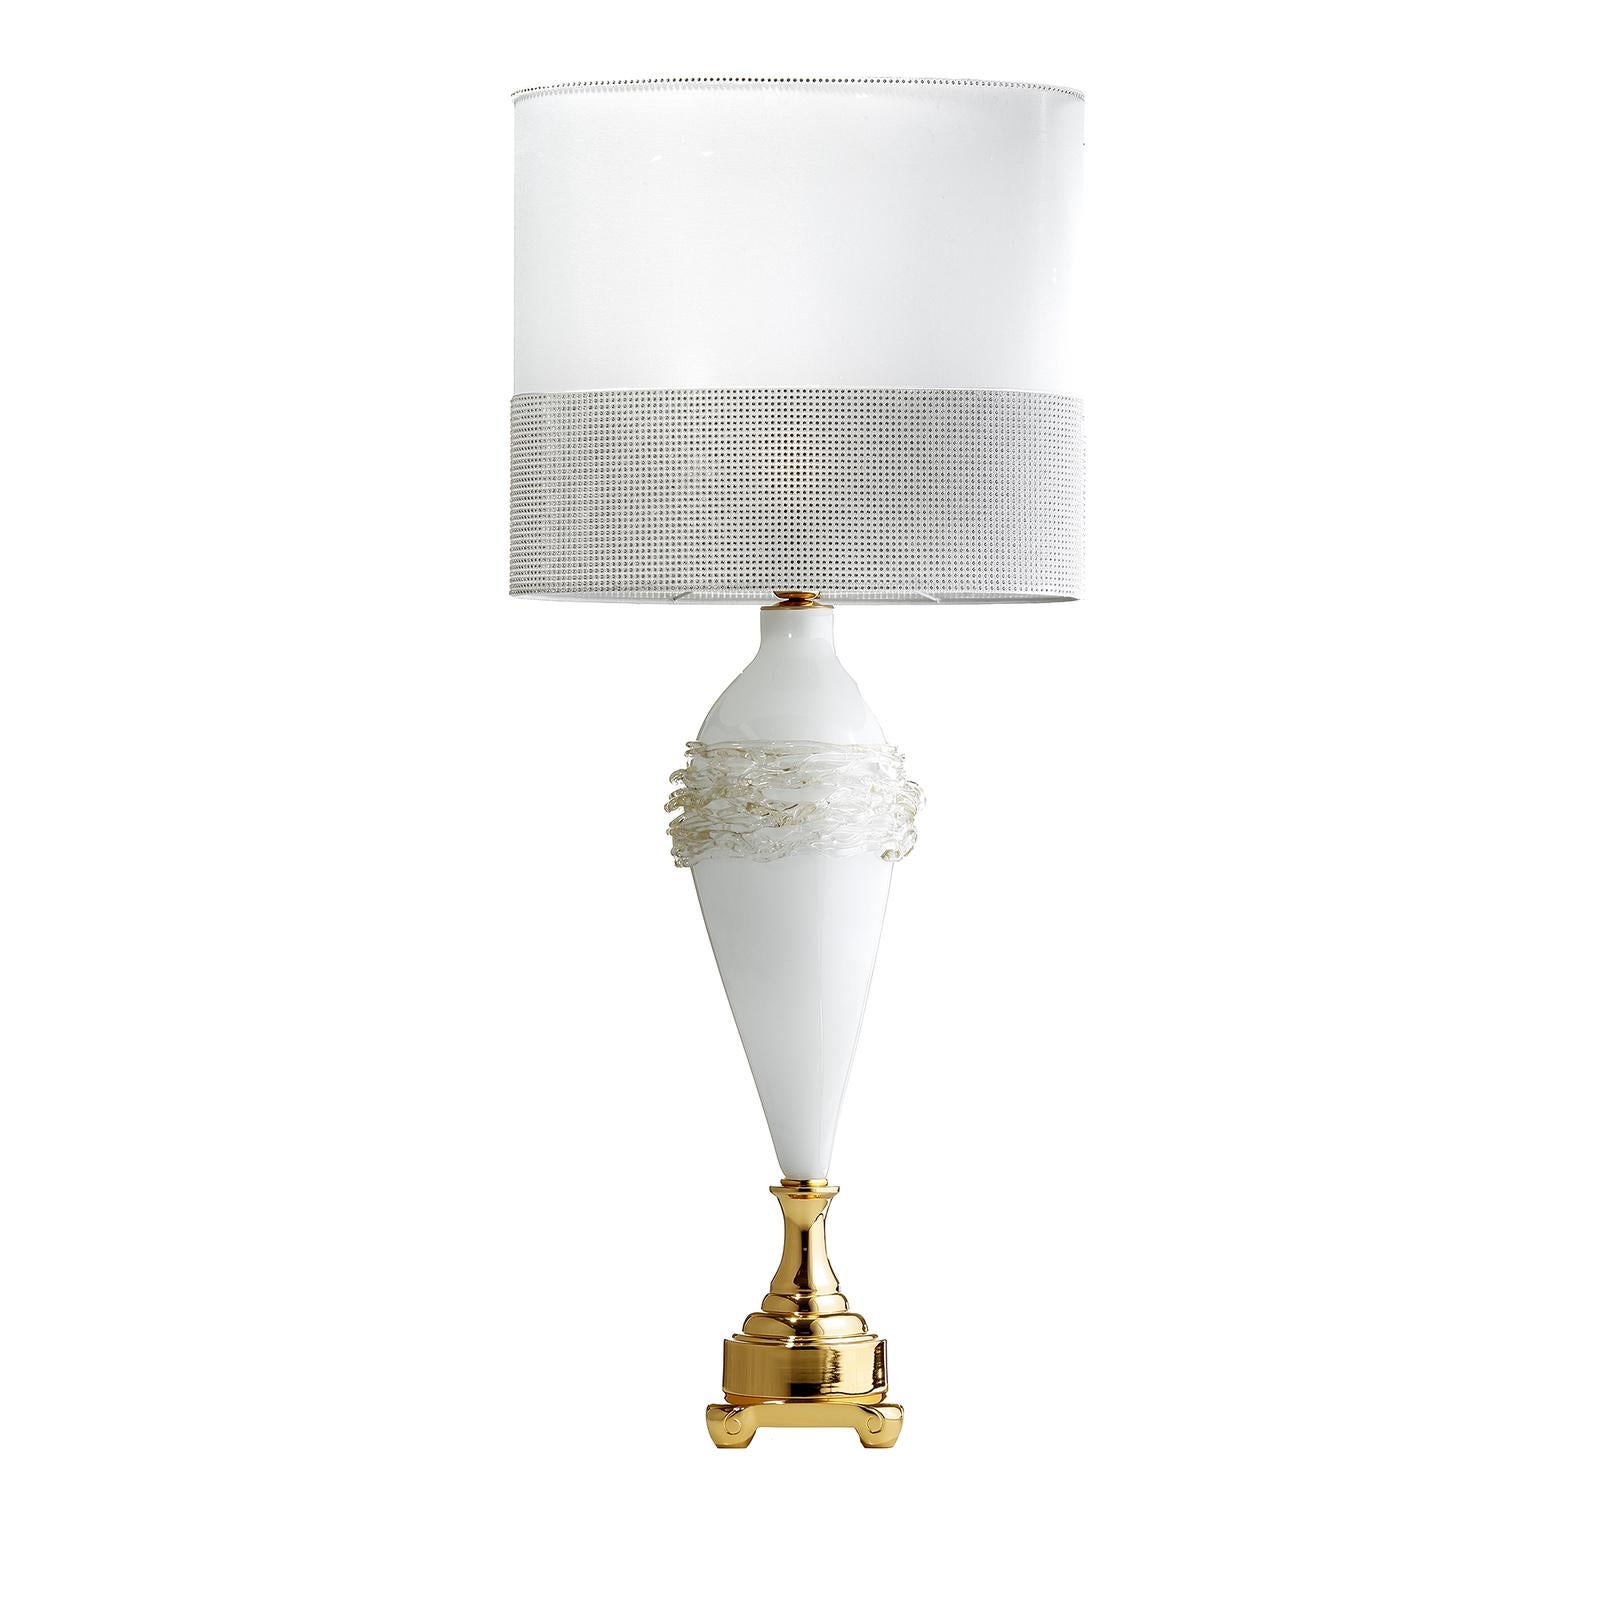 The larger version of the P-Gold table lamp, this stunning piece will make a statement in a contemporary or eclectic home, where it can be paired with an identical one to flank an entryway mirror or a bed frame or can illuminate a living room,